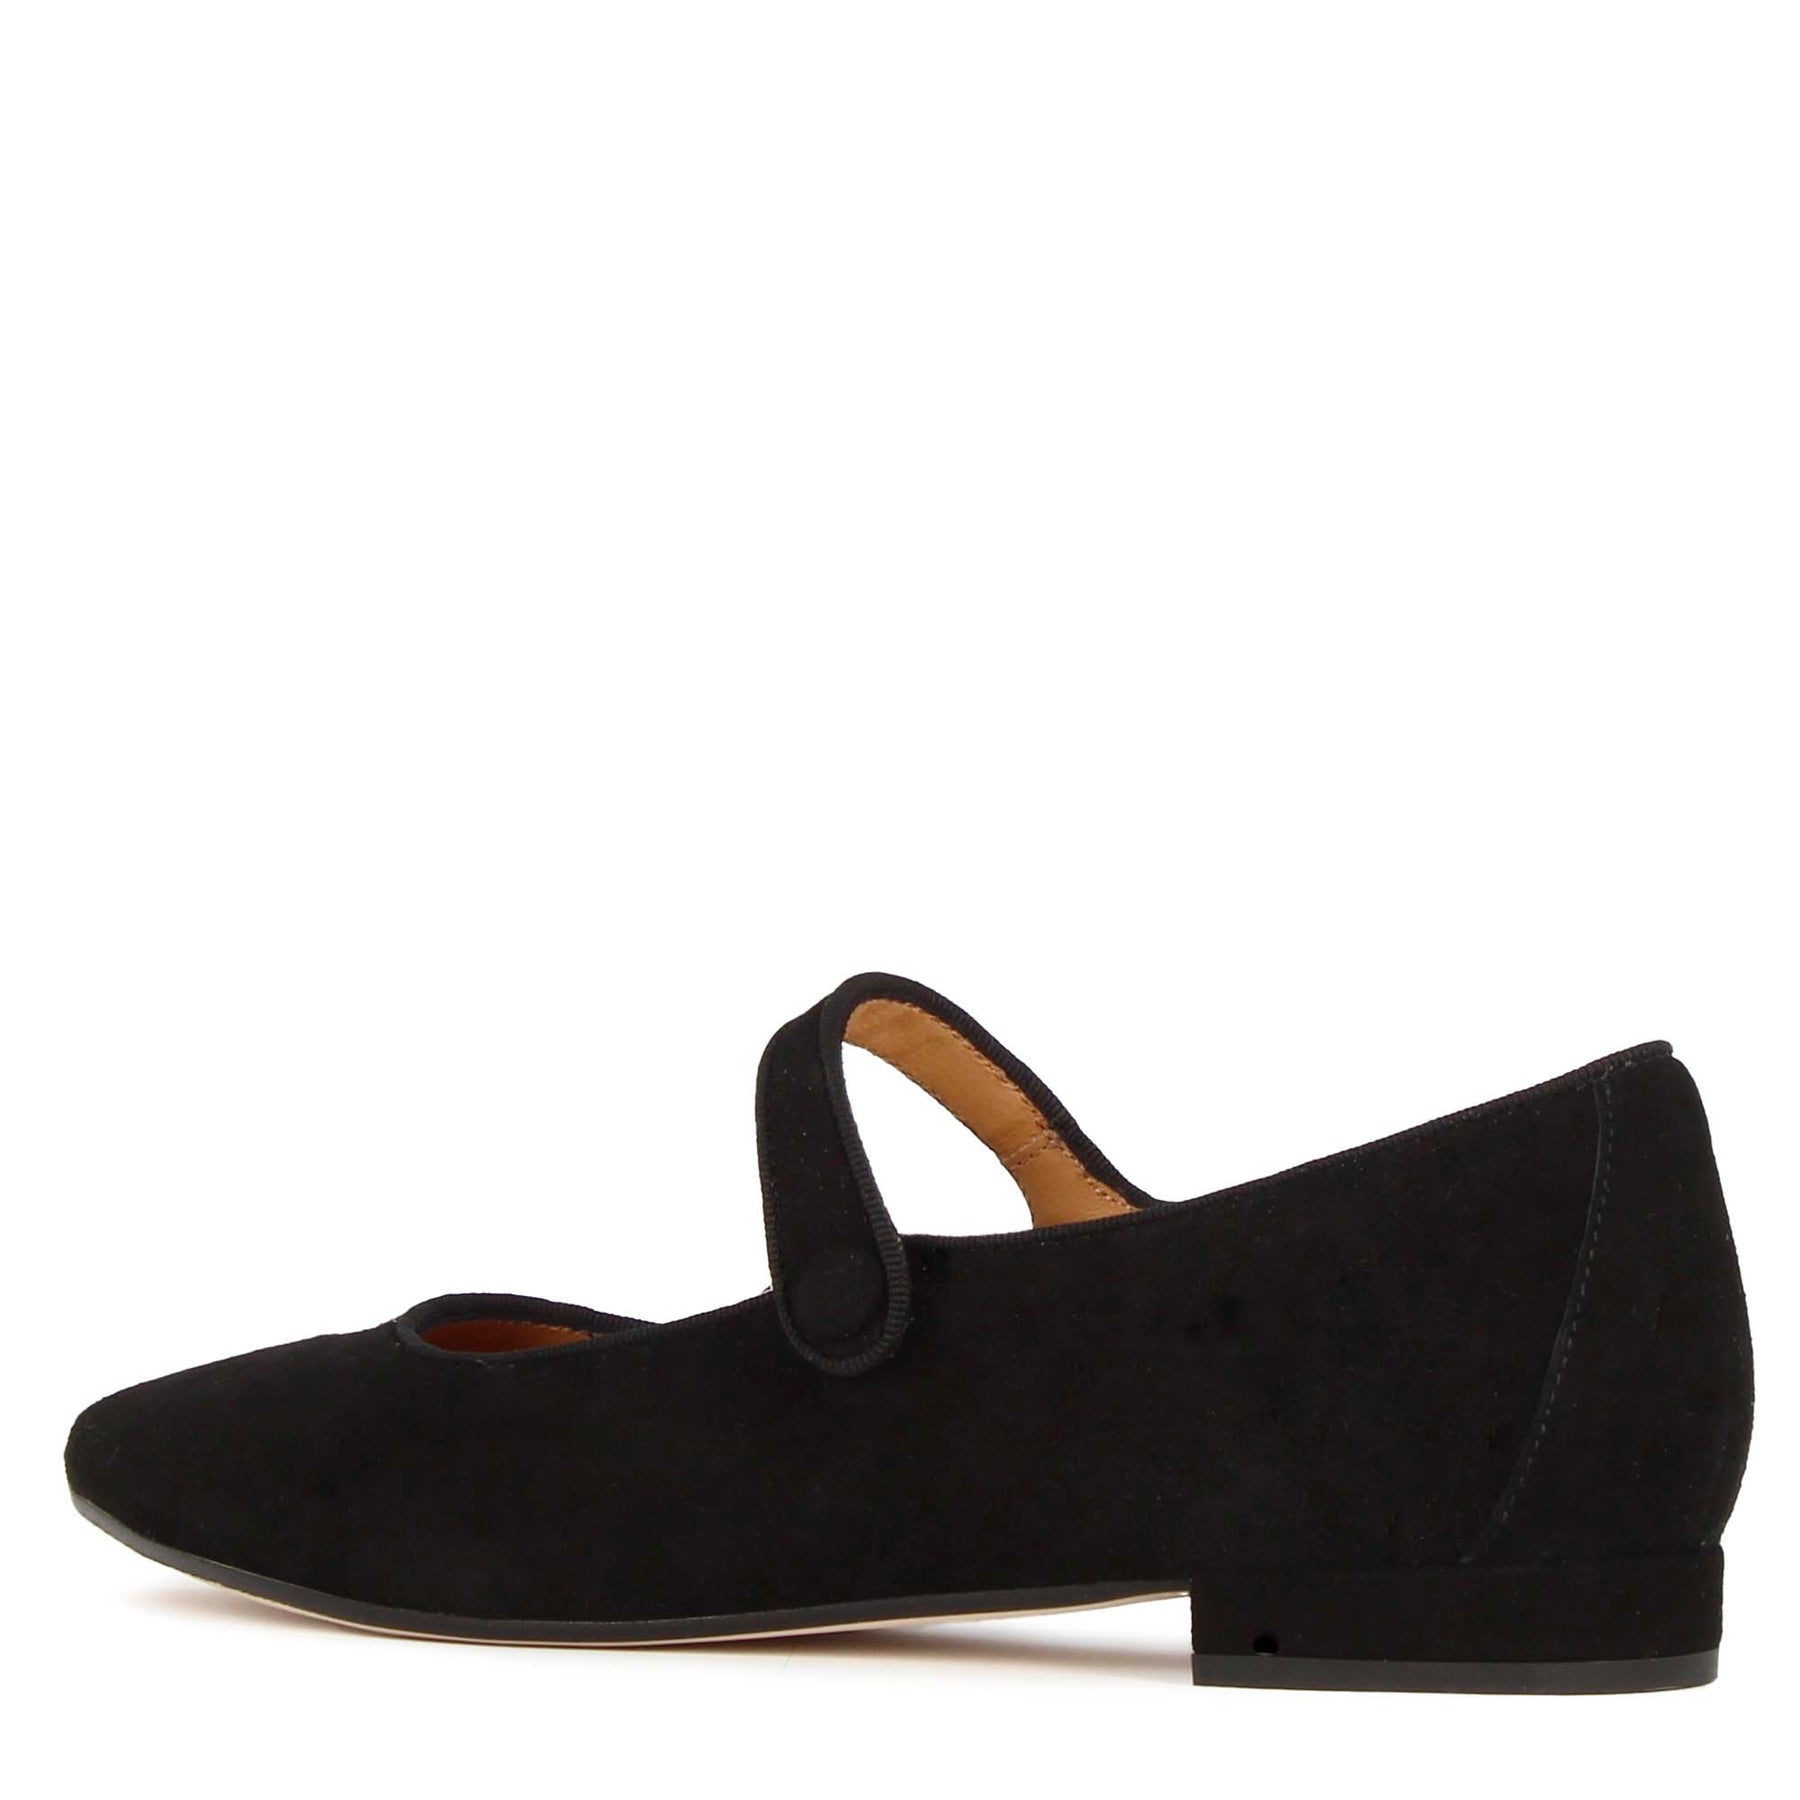 Women's Mary Jane ballerina shoes in suede with black strap